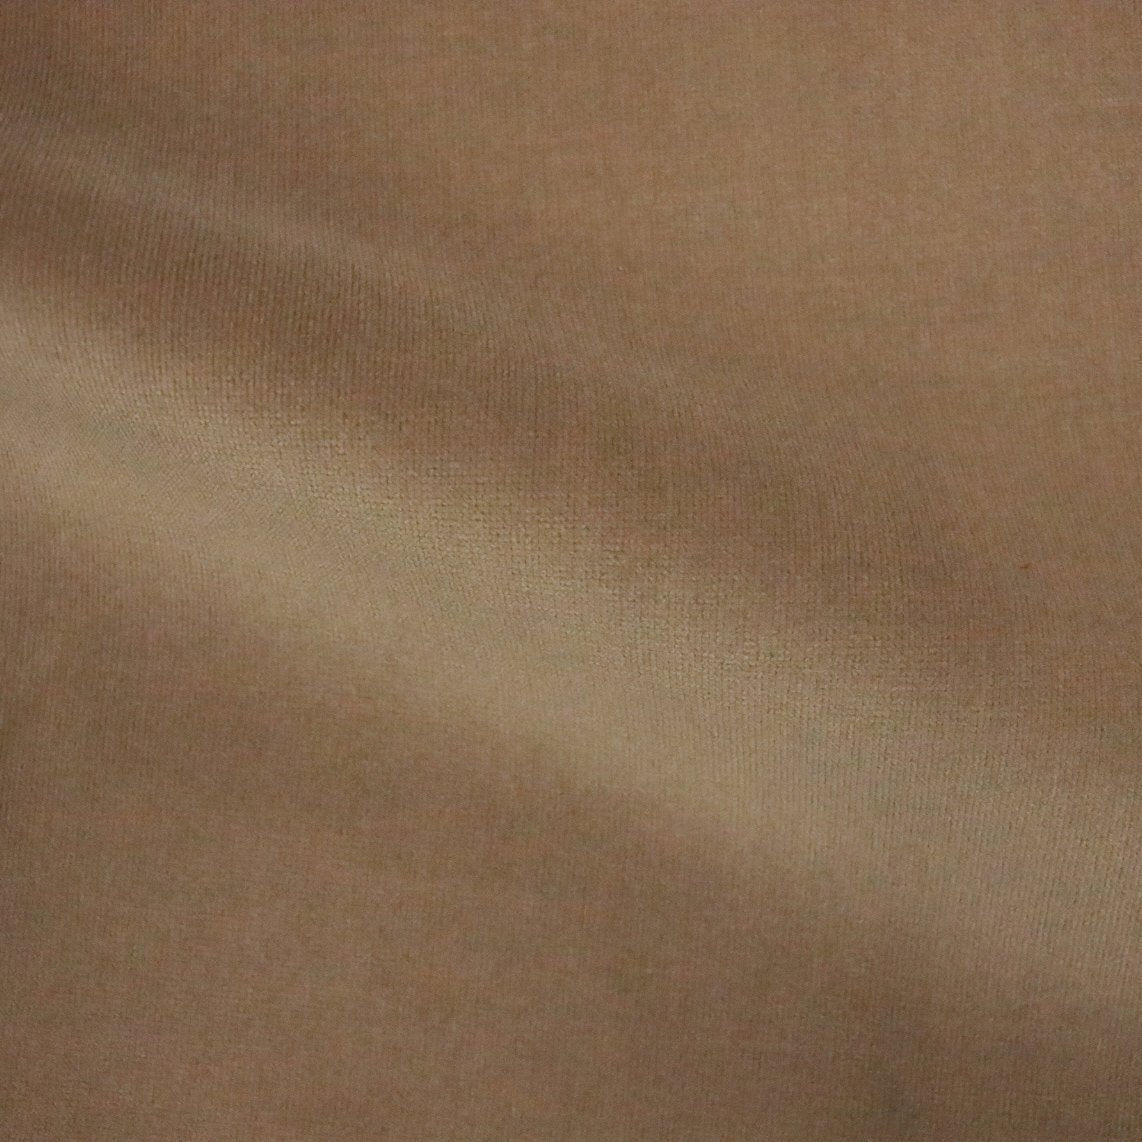 E156 Light Brown Smooth Polyester Velvet Upholstery Fabric by The Yard